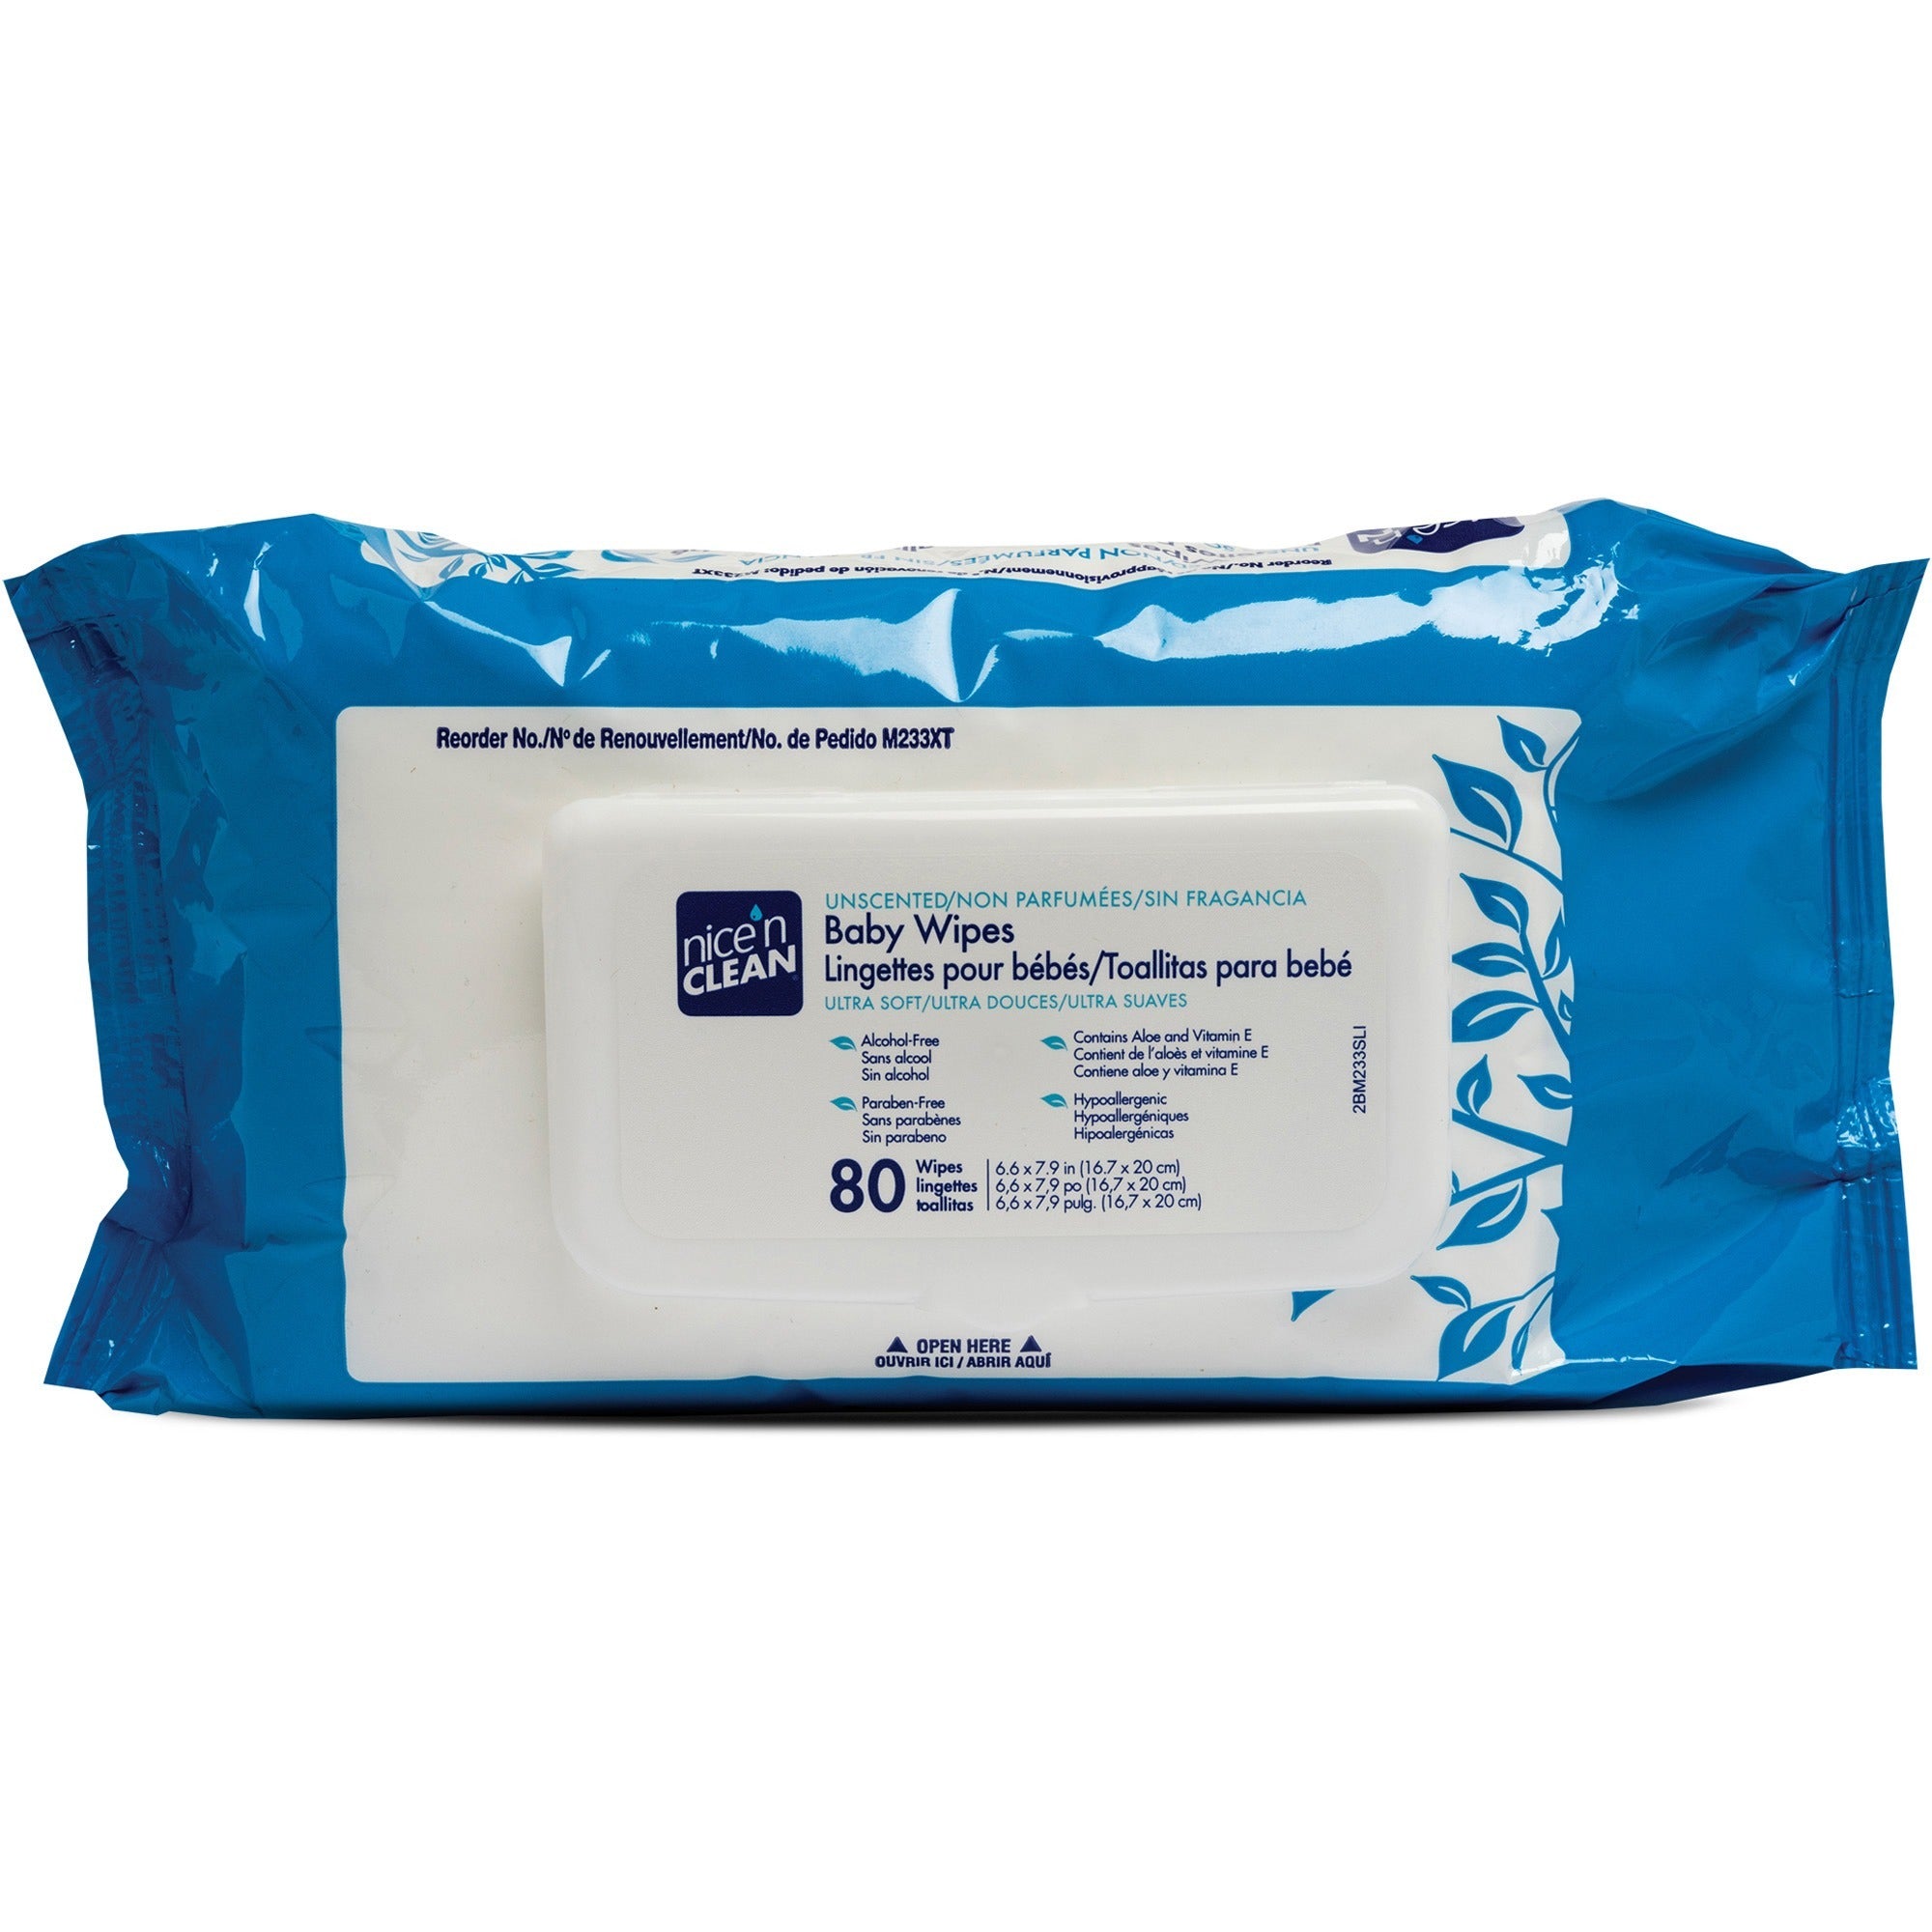 PDI Nice'n Clean Baby Wipes - 7.90" x 6.60" - Blue - Paraben-free, Latex-free, Resealable, Alcohol-free, Hypoallergenic, Moist - For Skin - 80 Per Pack - 12 / Carton